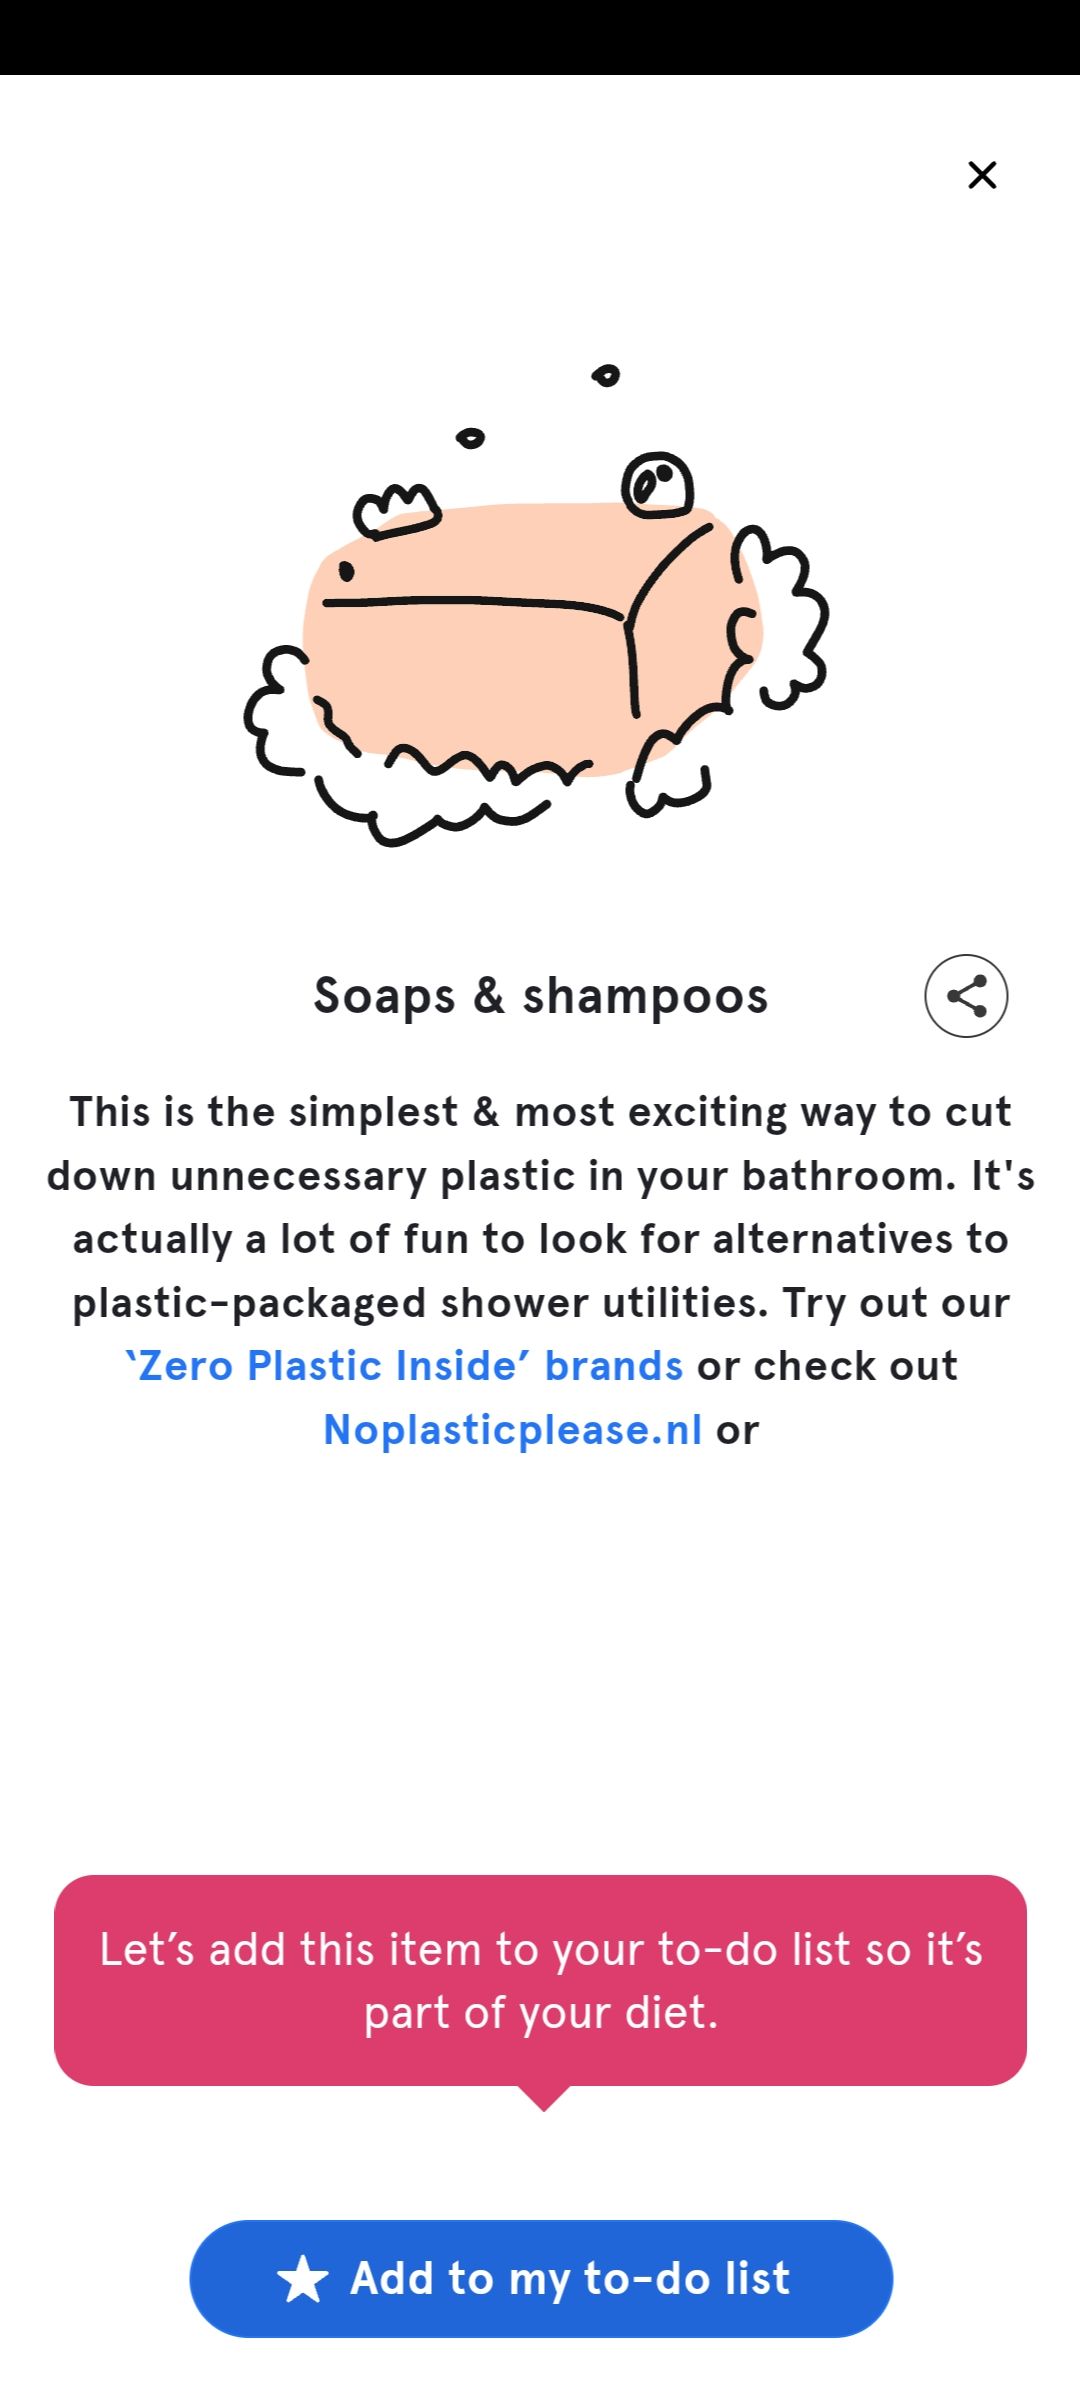 my little plastic footprint app showing what you can do instead of traditional soaps and shampoos